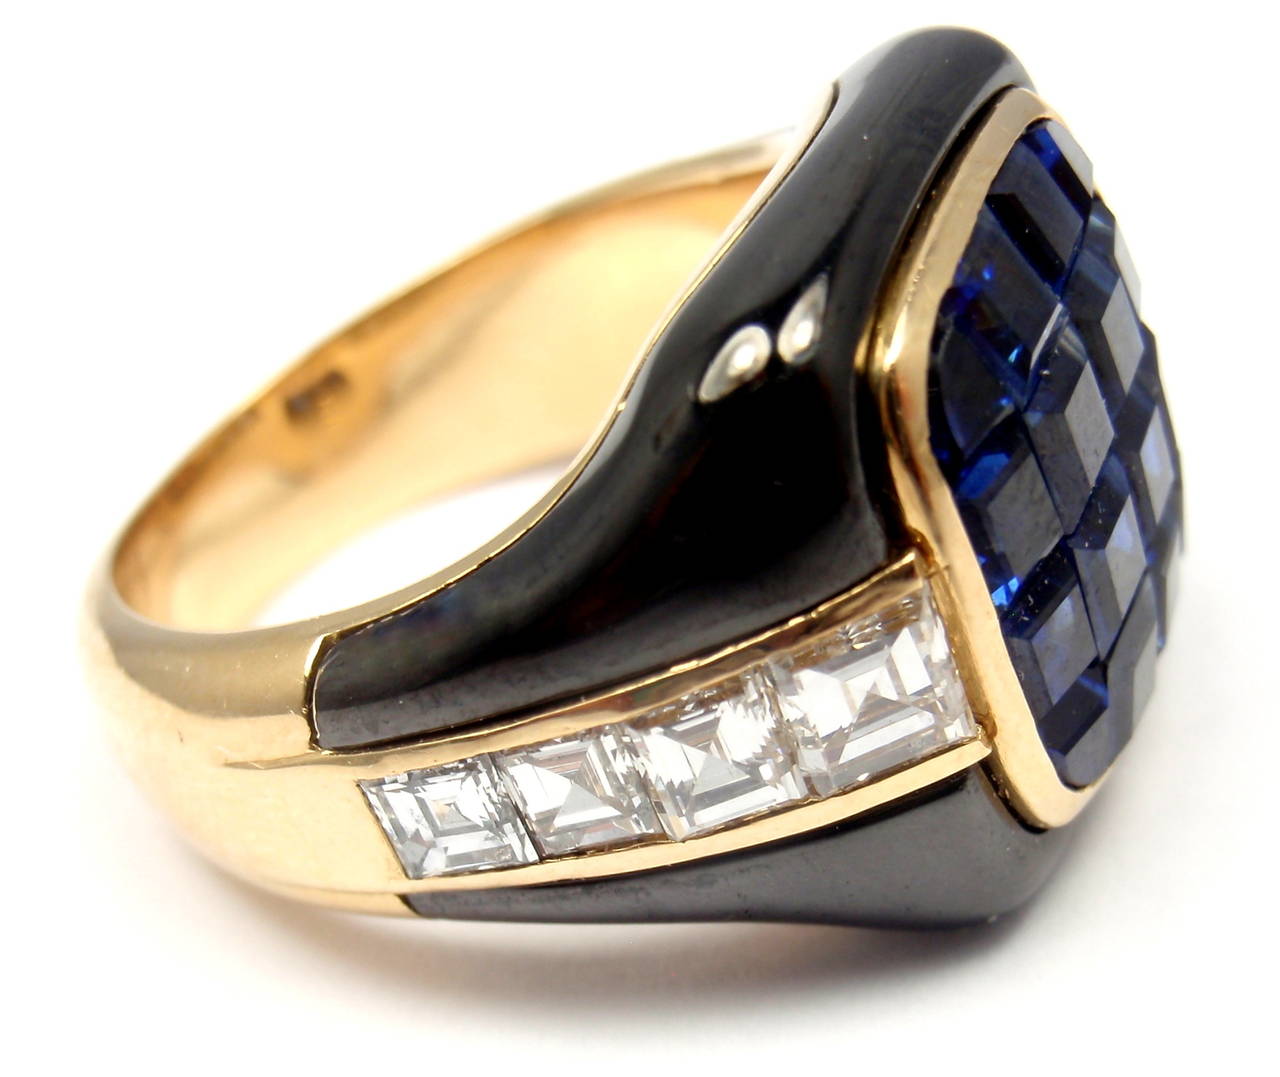 Piaget Enamel Invisible Set Sapphire Diamond Gold Cocktail Ring In Excellent Condition For Sale In Holland, PA